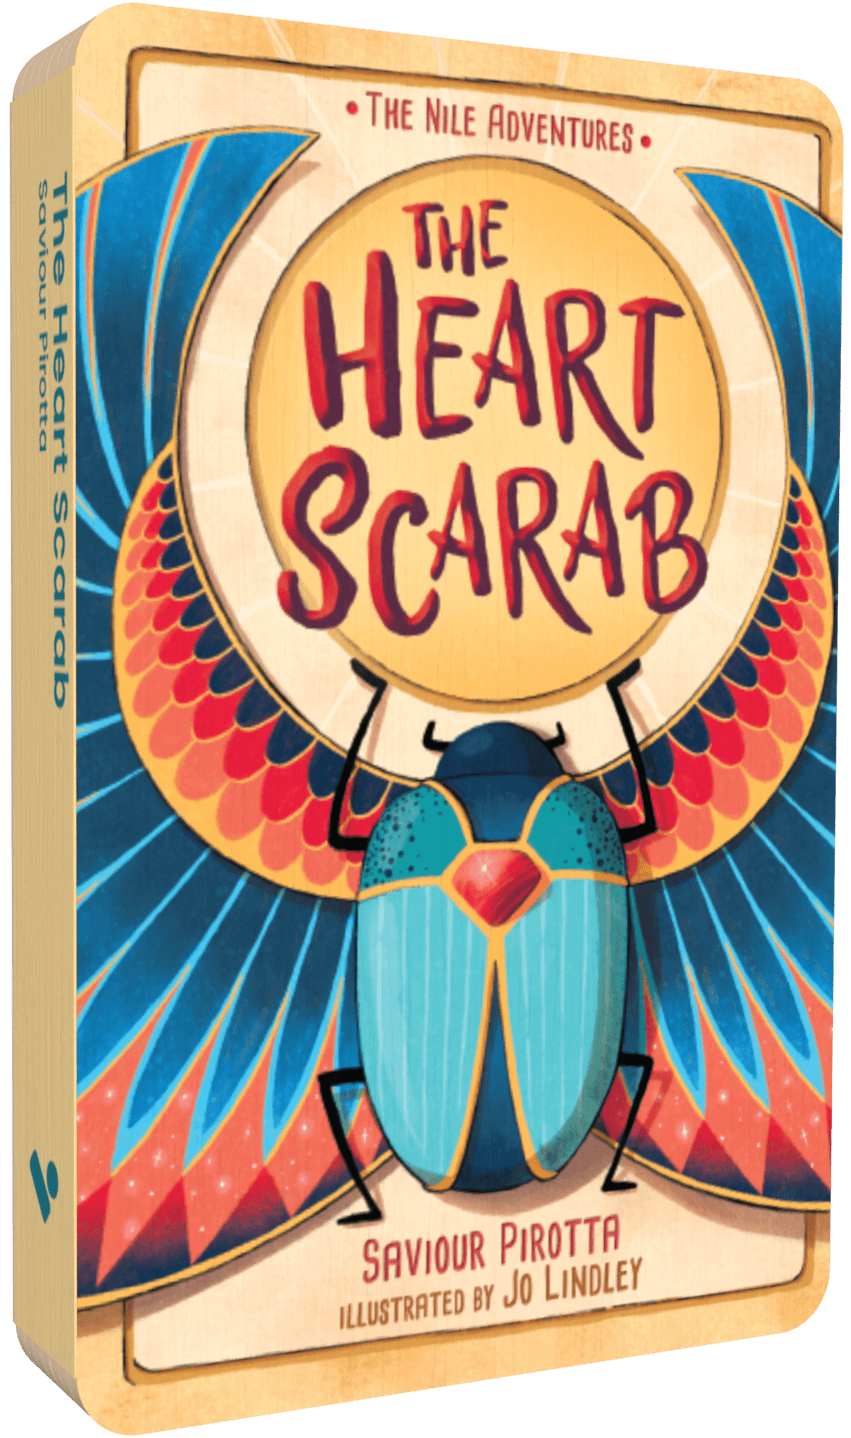 The Heart Scarab